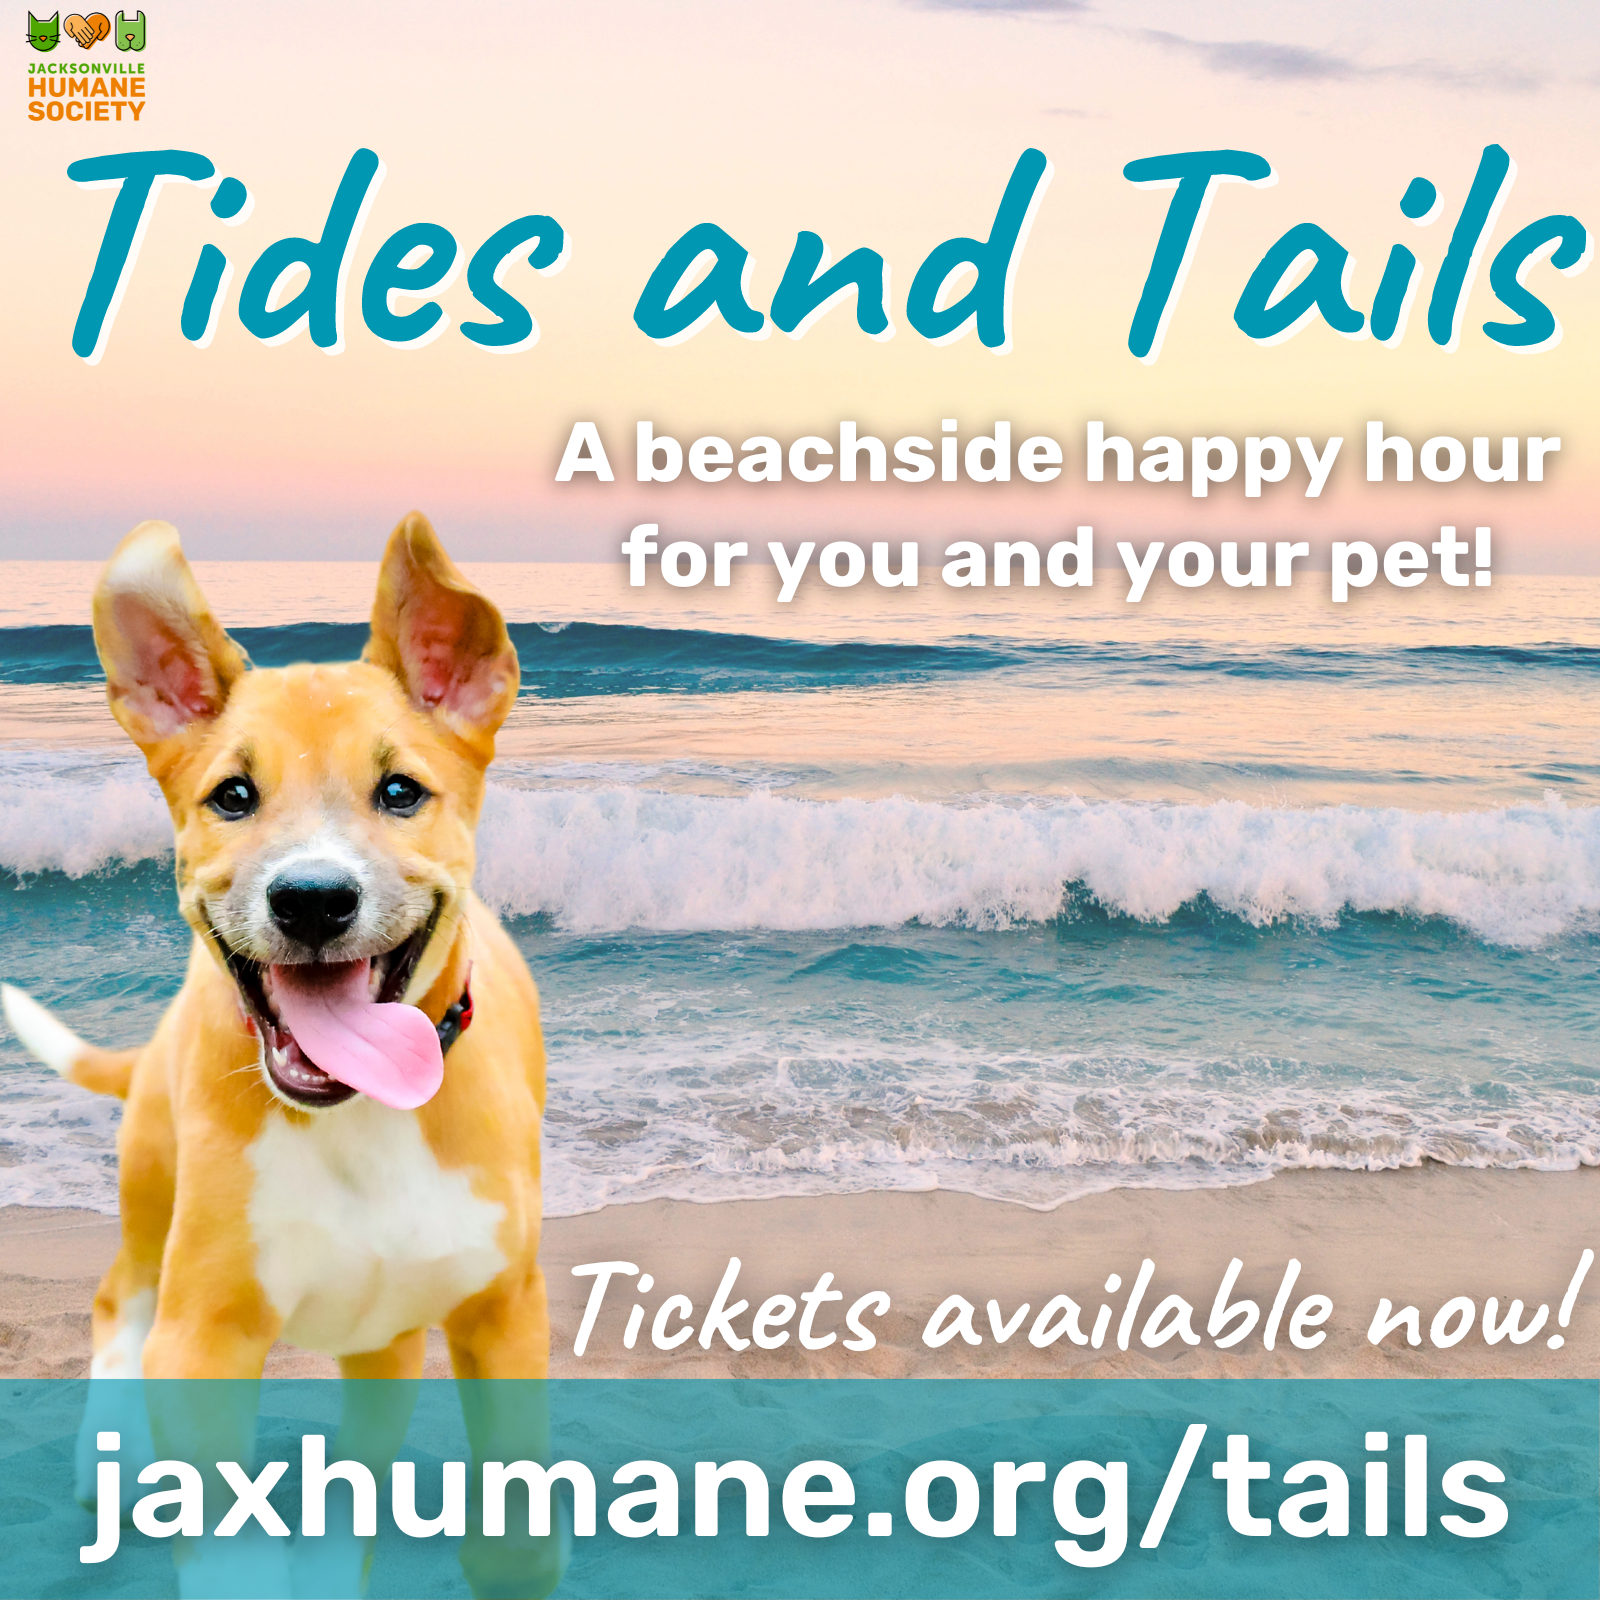 Tides and Tails April Event Image